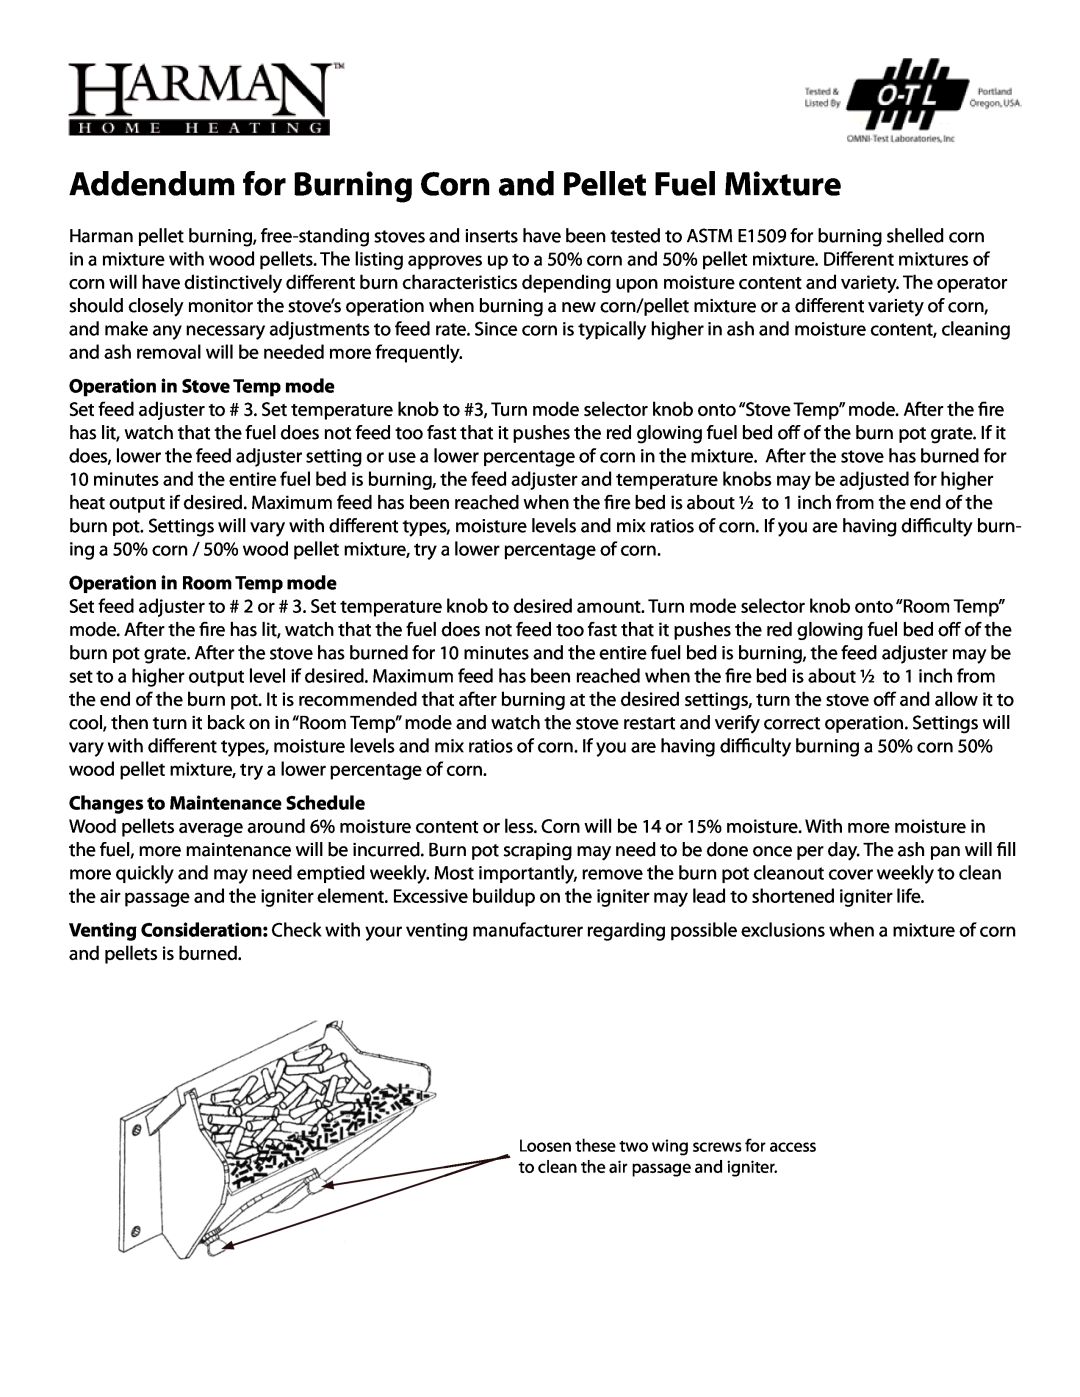 Harman Stove Company R16 manual Addendum for Burning Corn and Pellet Fuel Mixture, Operation in Stove Temp mode 